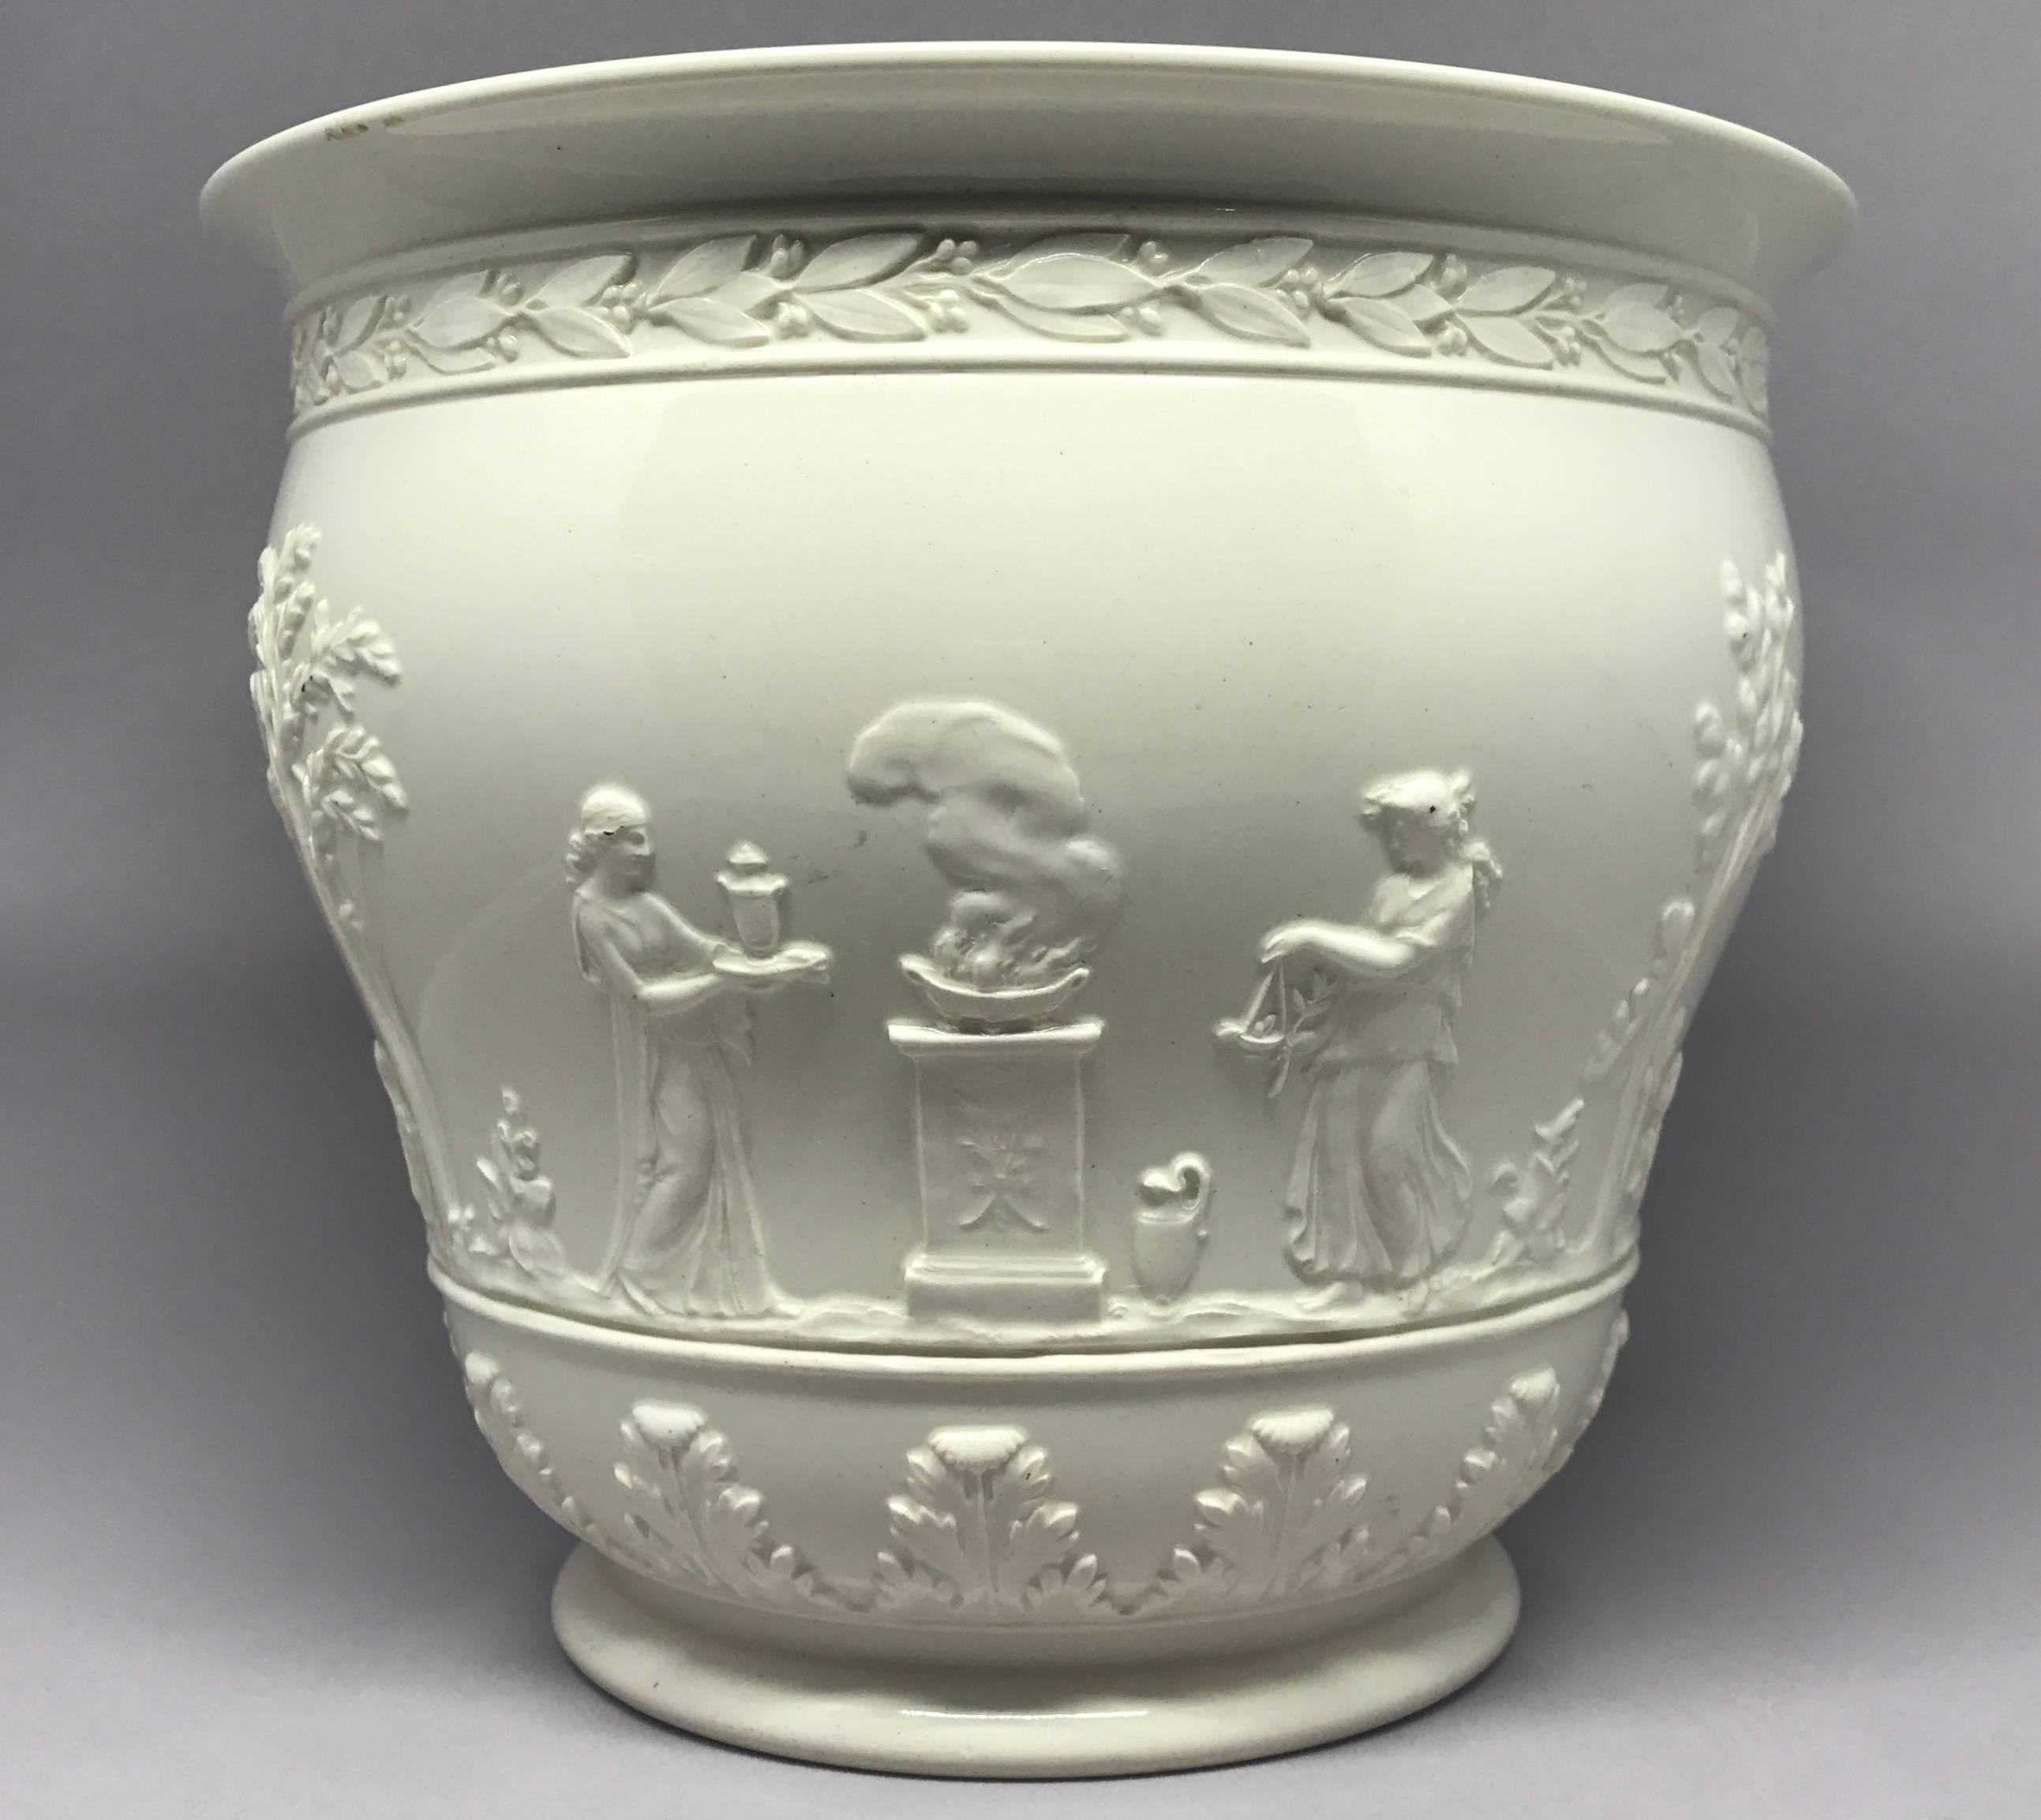 White wedgwood cachepot in the neoclassical style. Vintage cream-colored Queensware embossed flowerpot/jardiniere with markings for Wedgwood, England, late 1920s.
Dimensions: 7.25